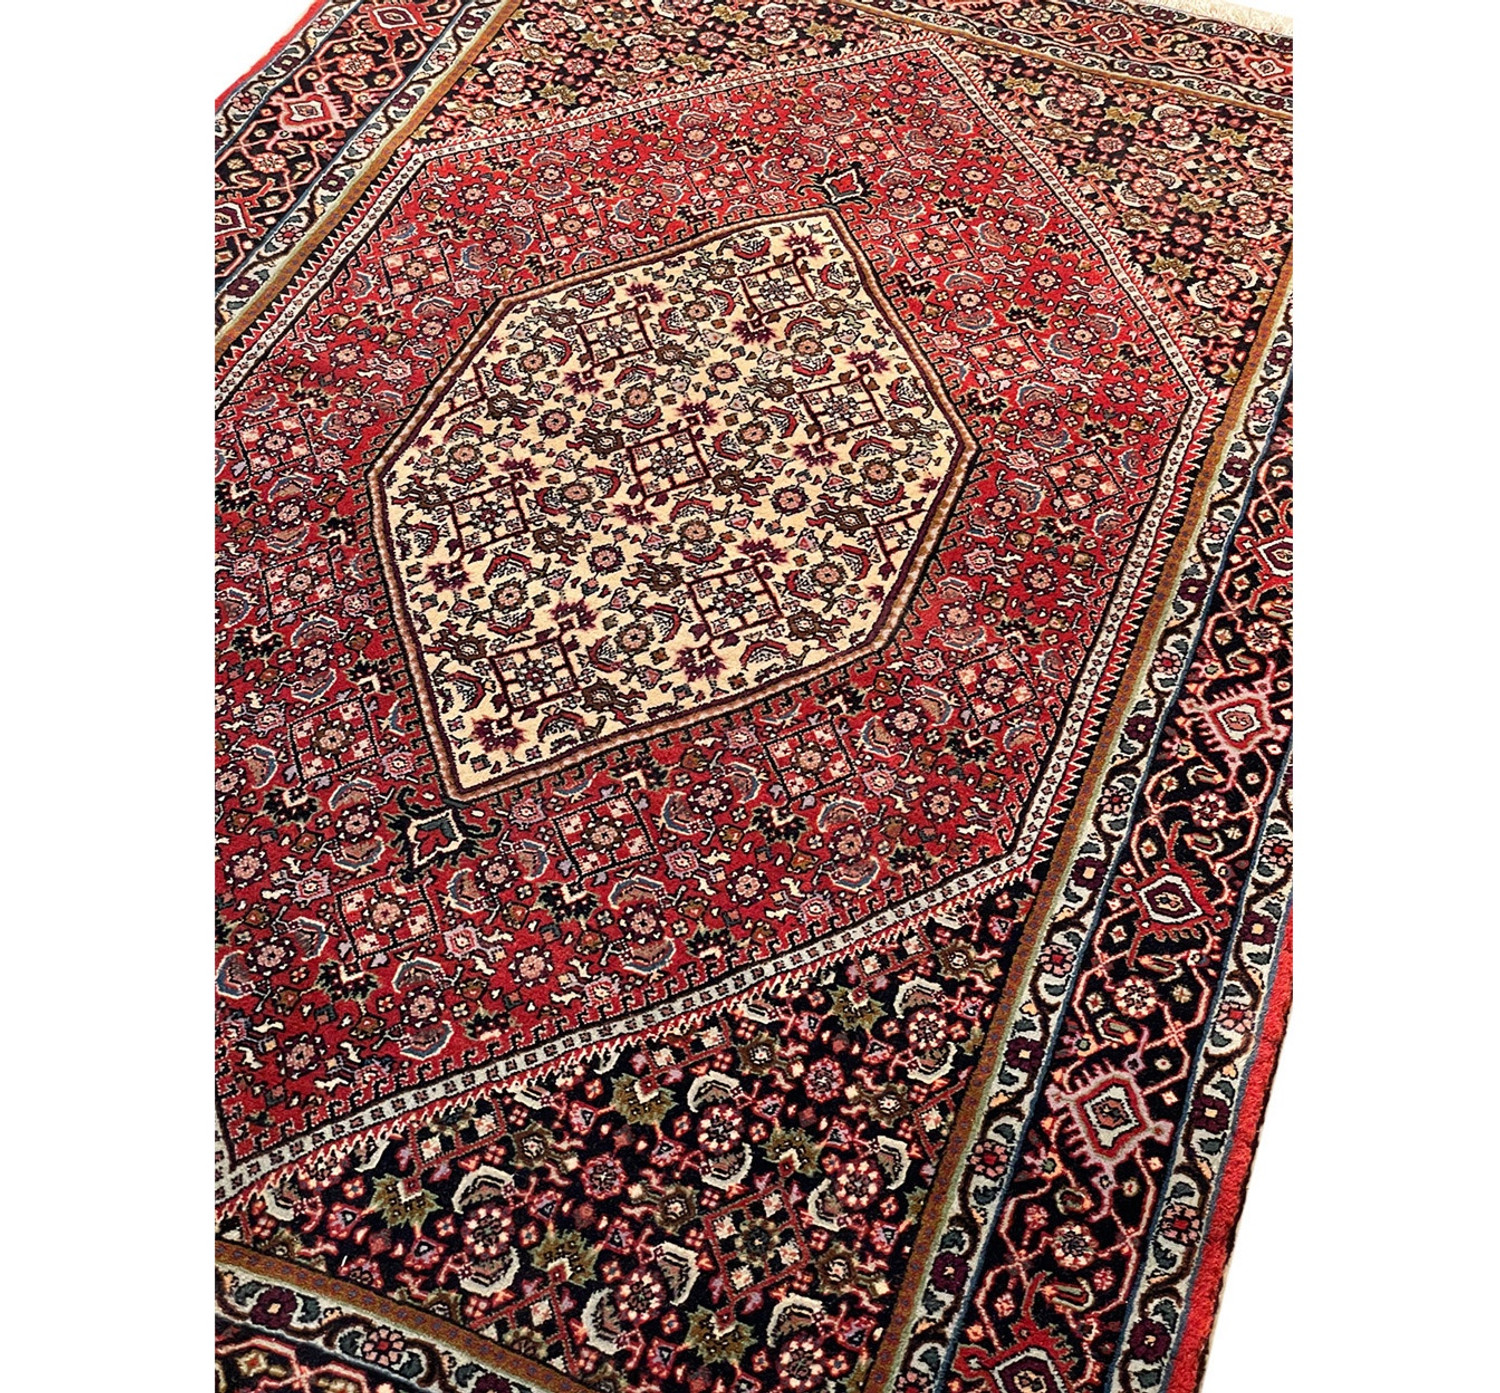 Angled view of a Persian Bijar rug, highlighting the plush pile and detailed motifs